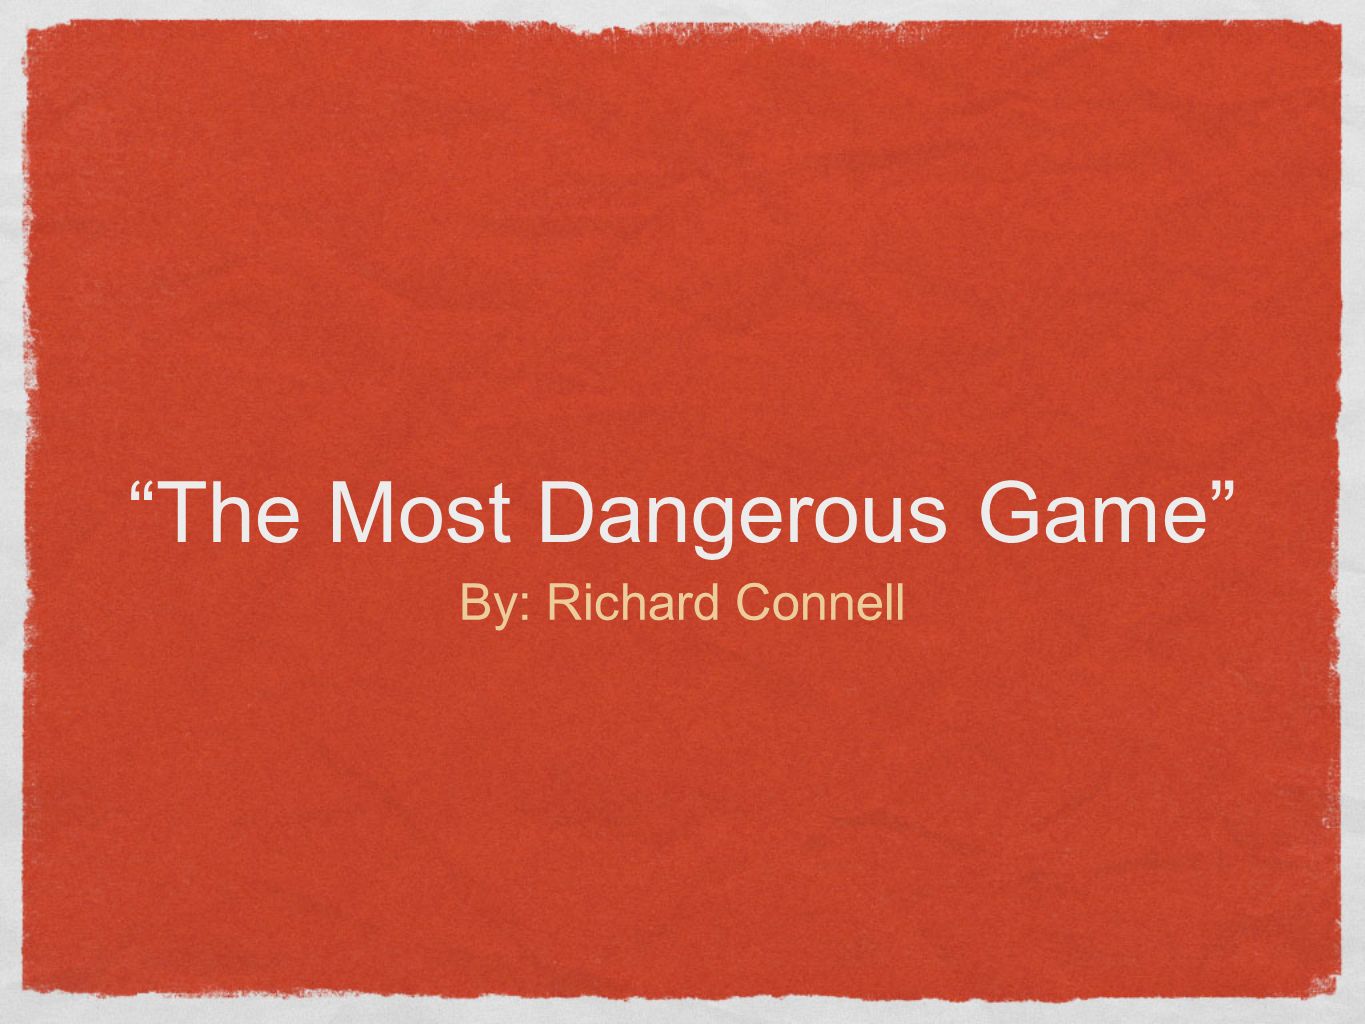 Five paragraph essay on the most dangerous game